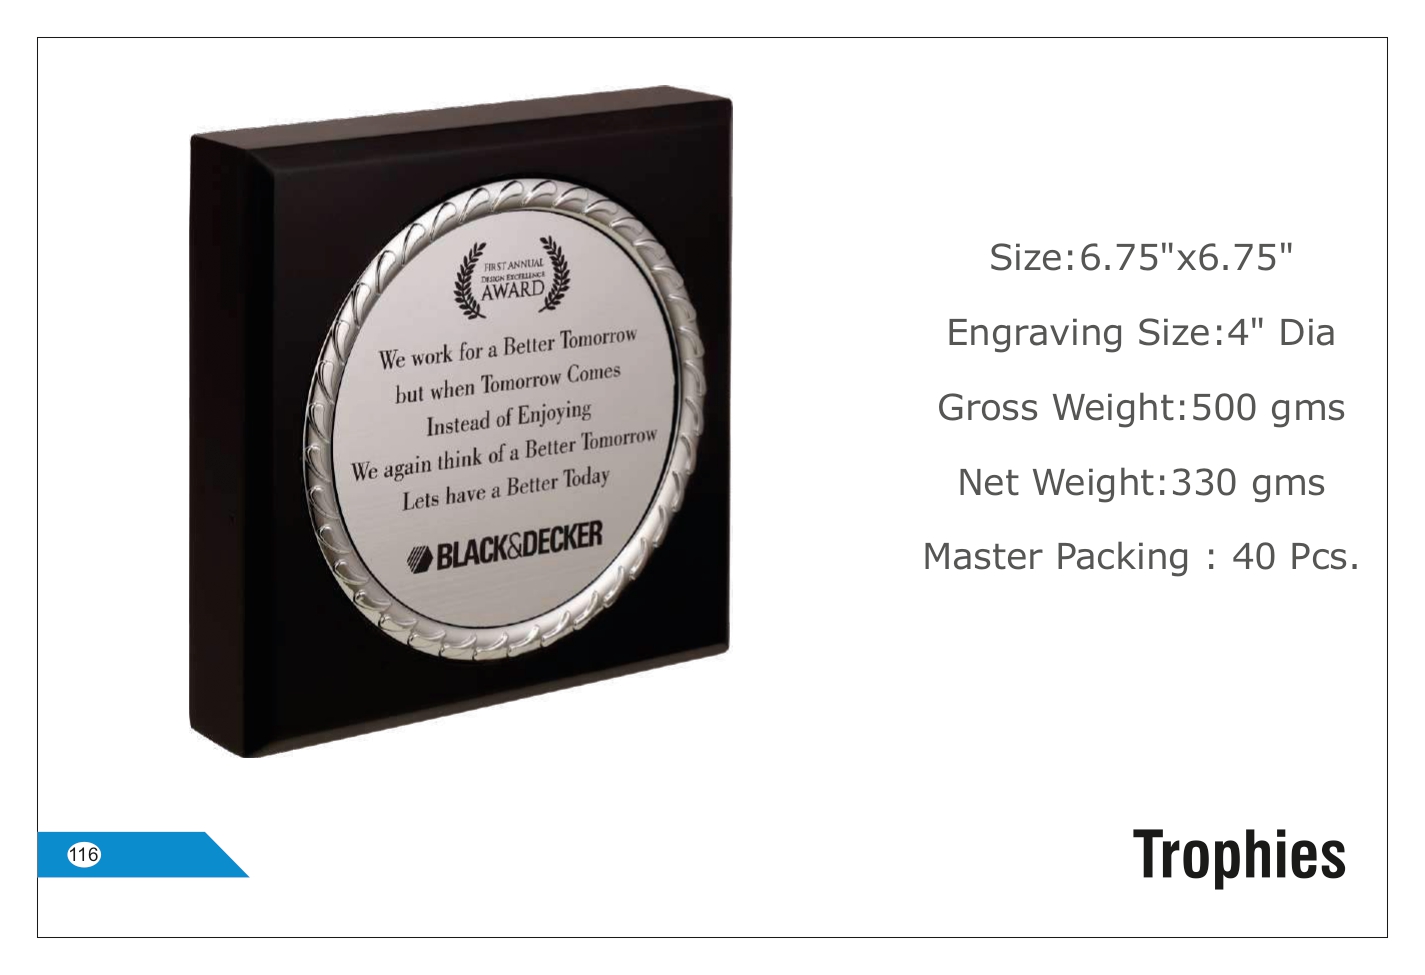 Circular Recognition Trophy - Personalized Engraving